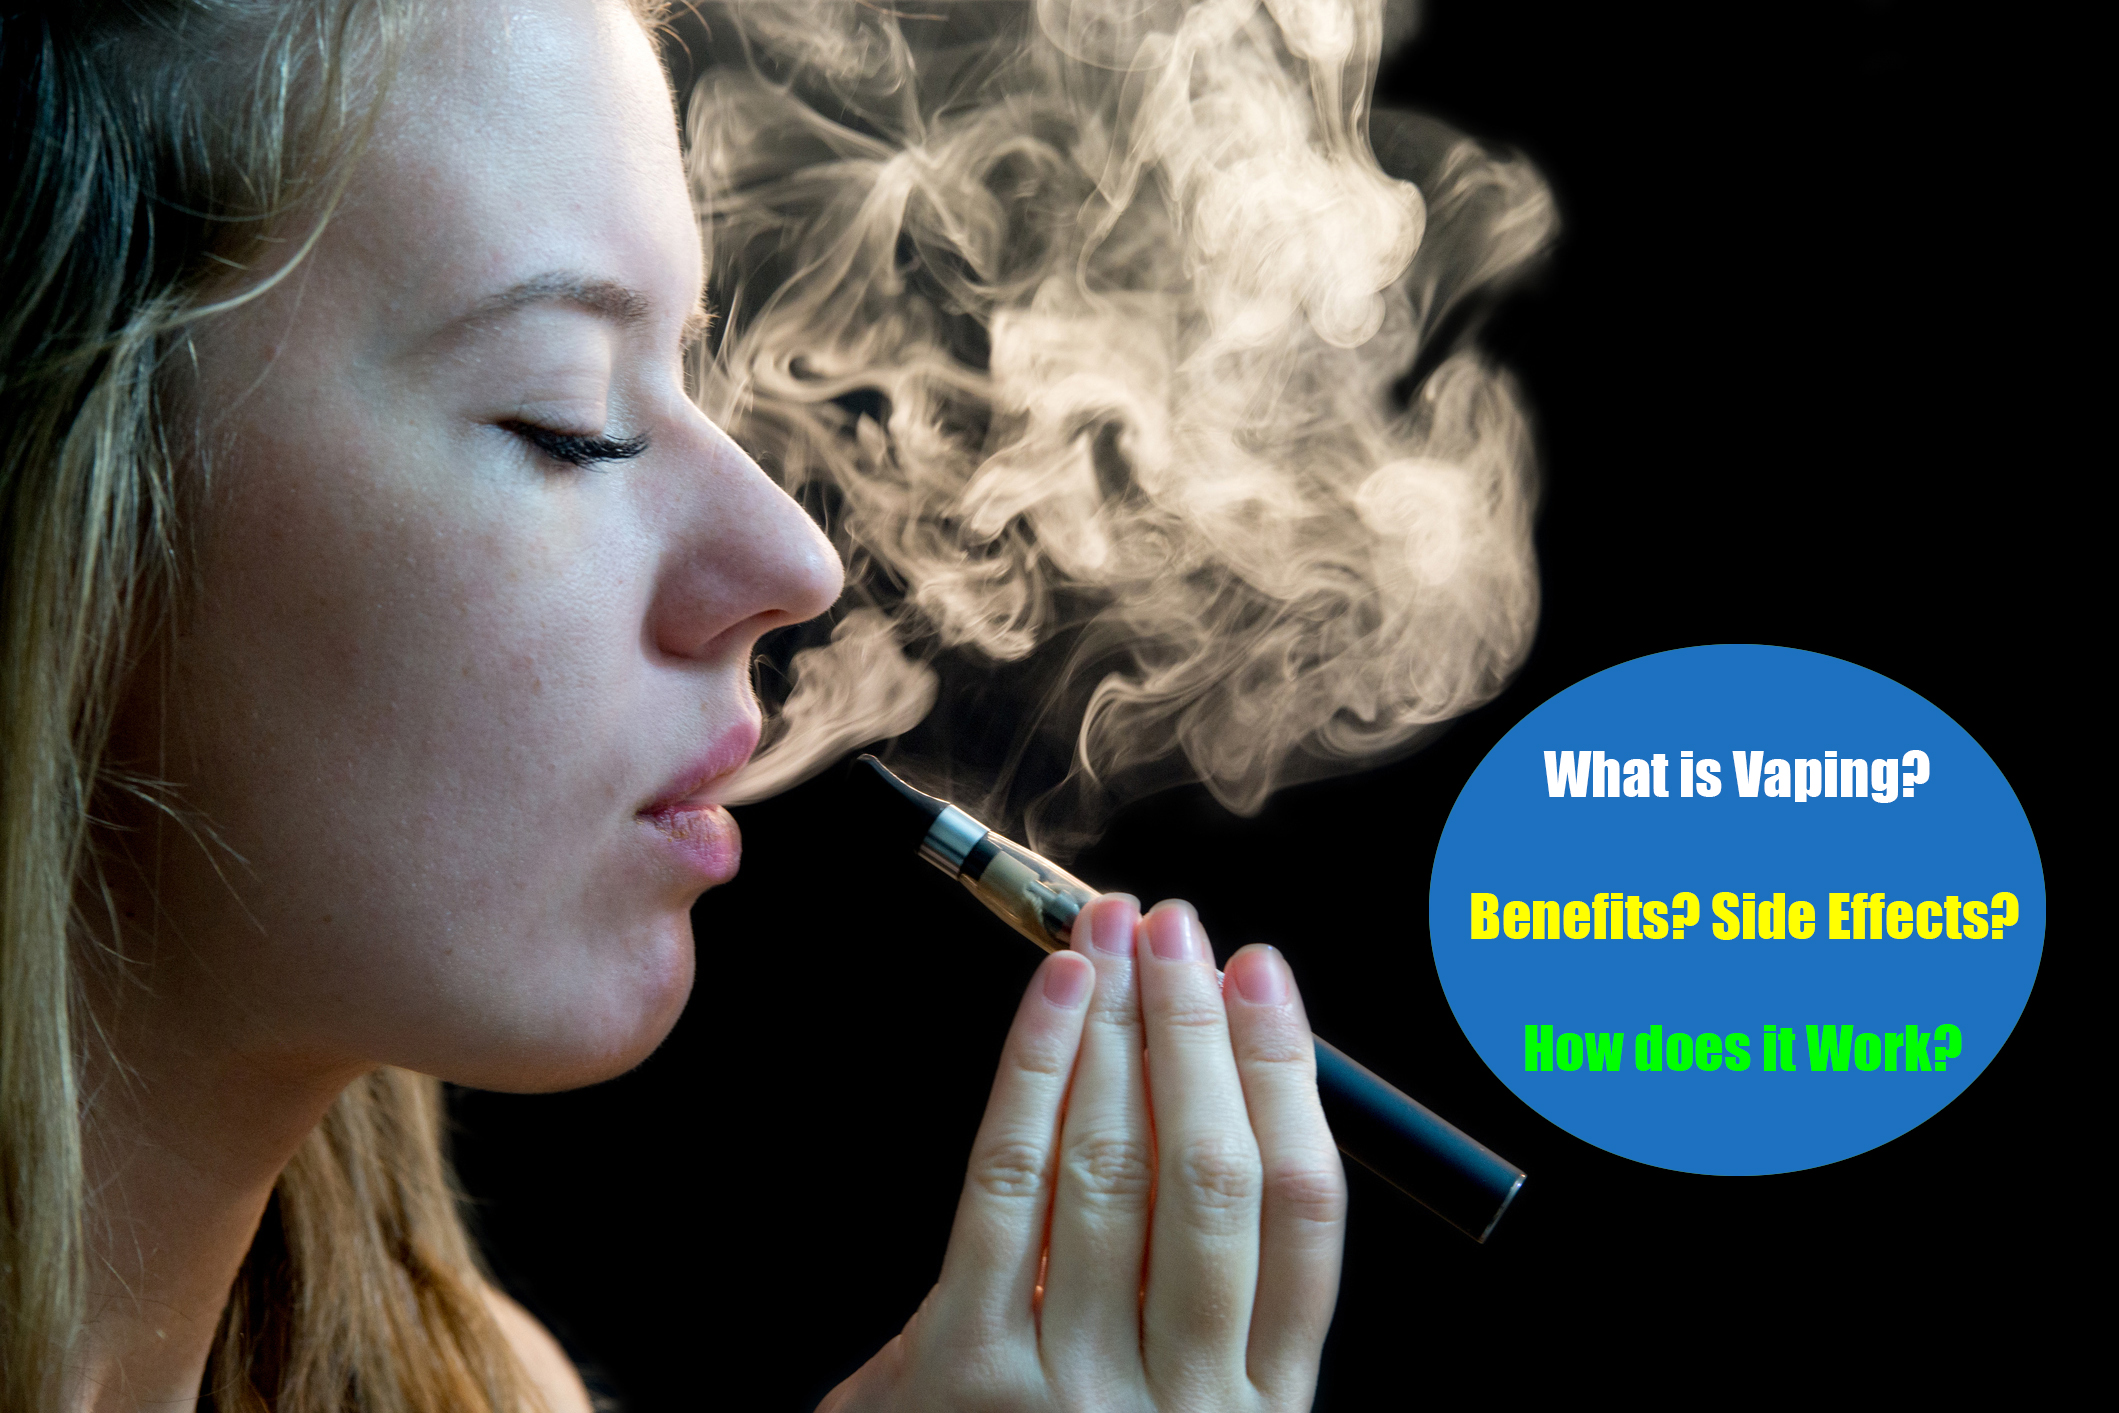 The benefit and side effects of Vaping